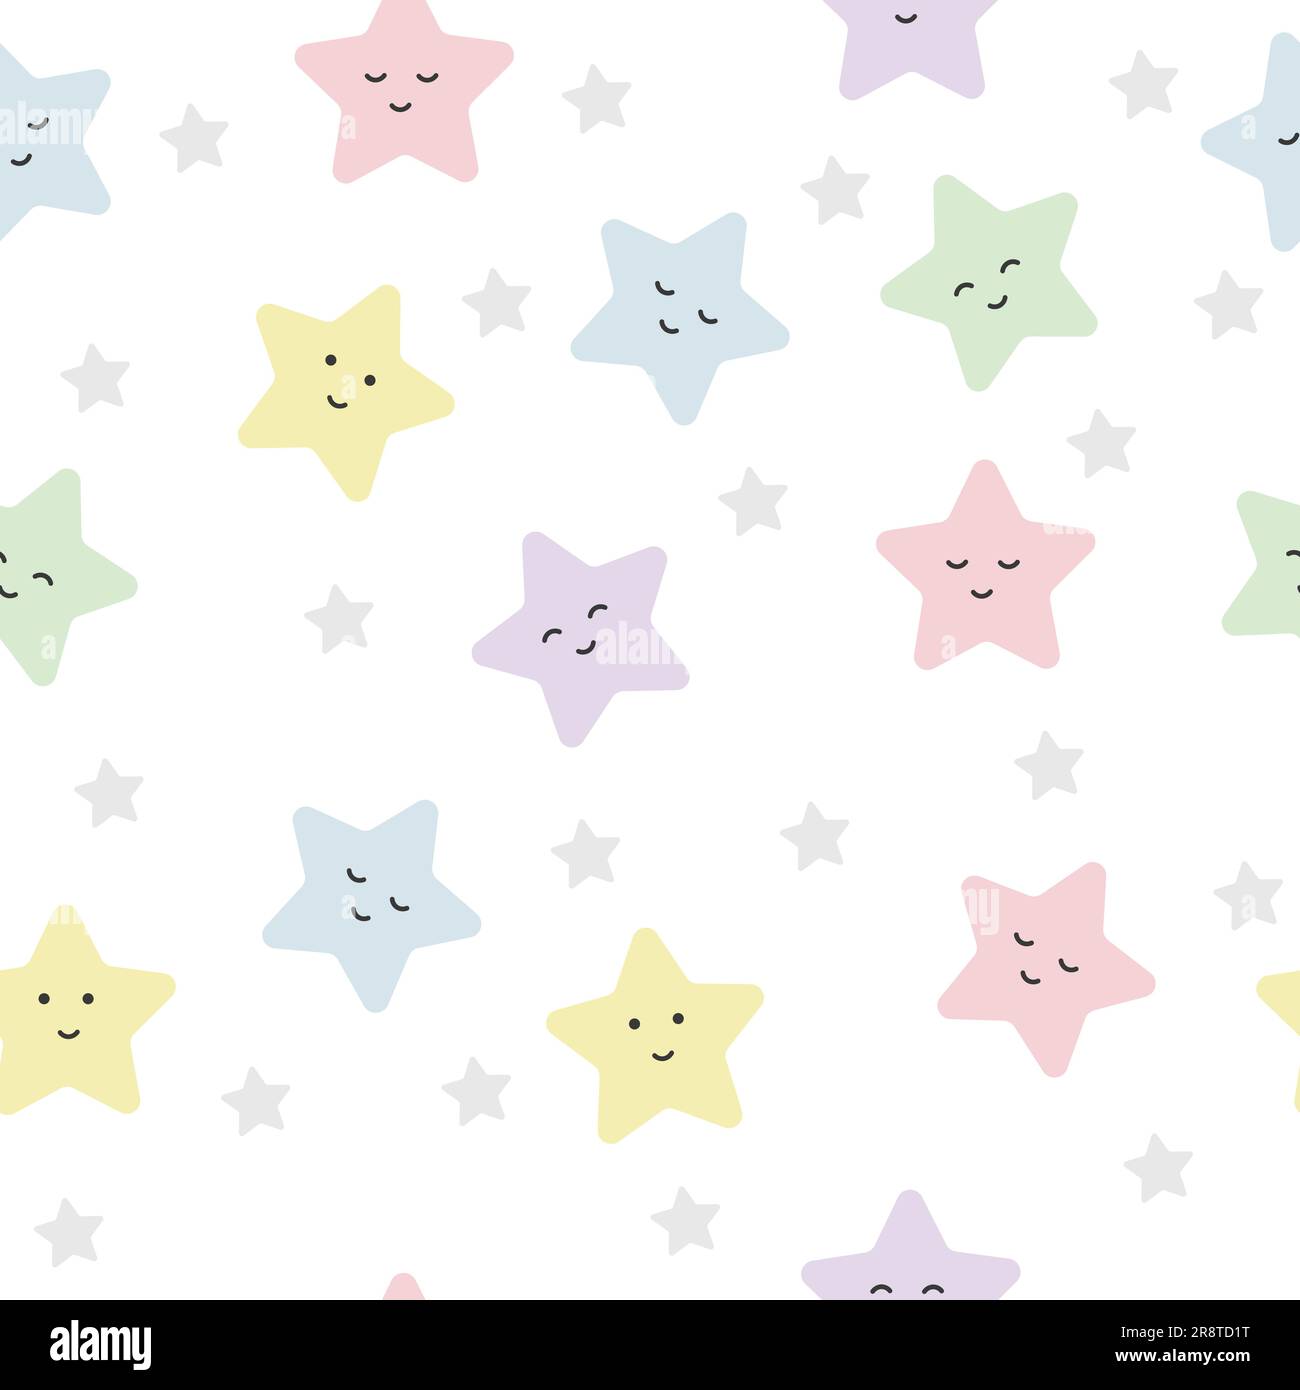 Cheerful colored cute stars with emotions, children's seamless pattern in soft pastel colors. Vector Stock Vector